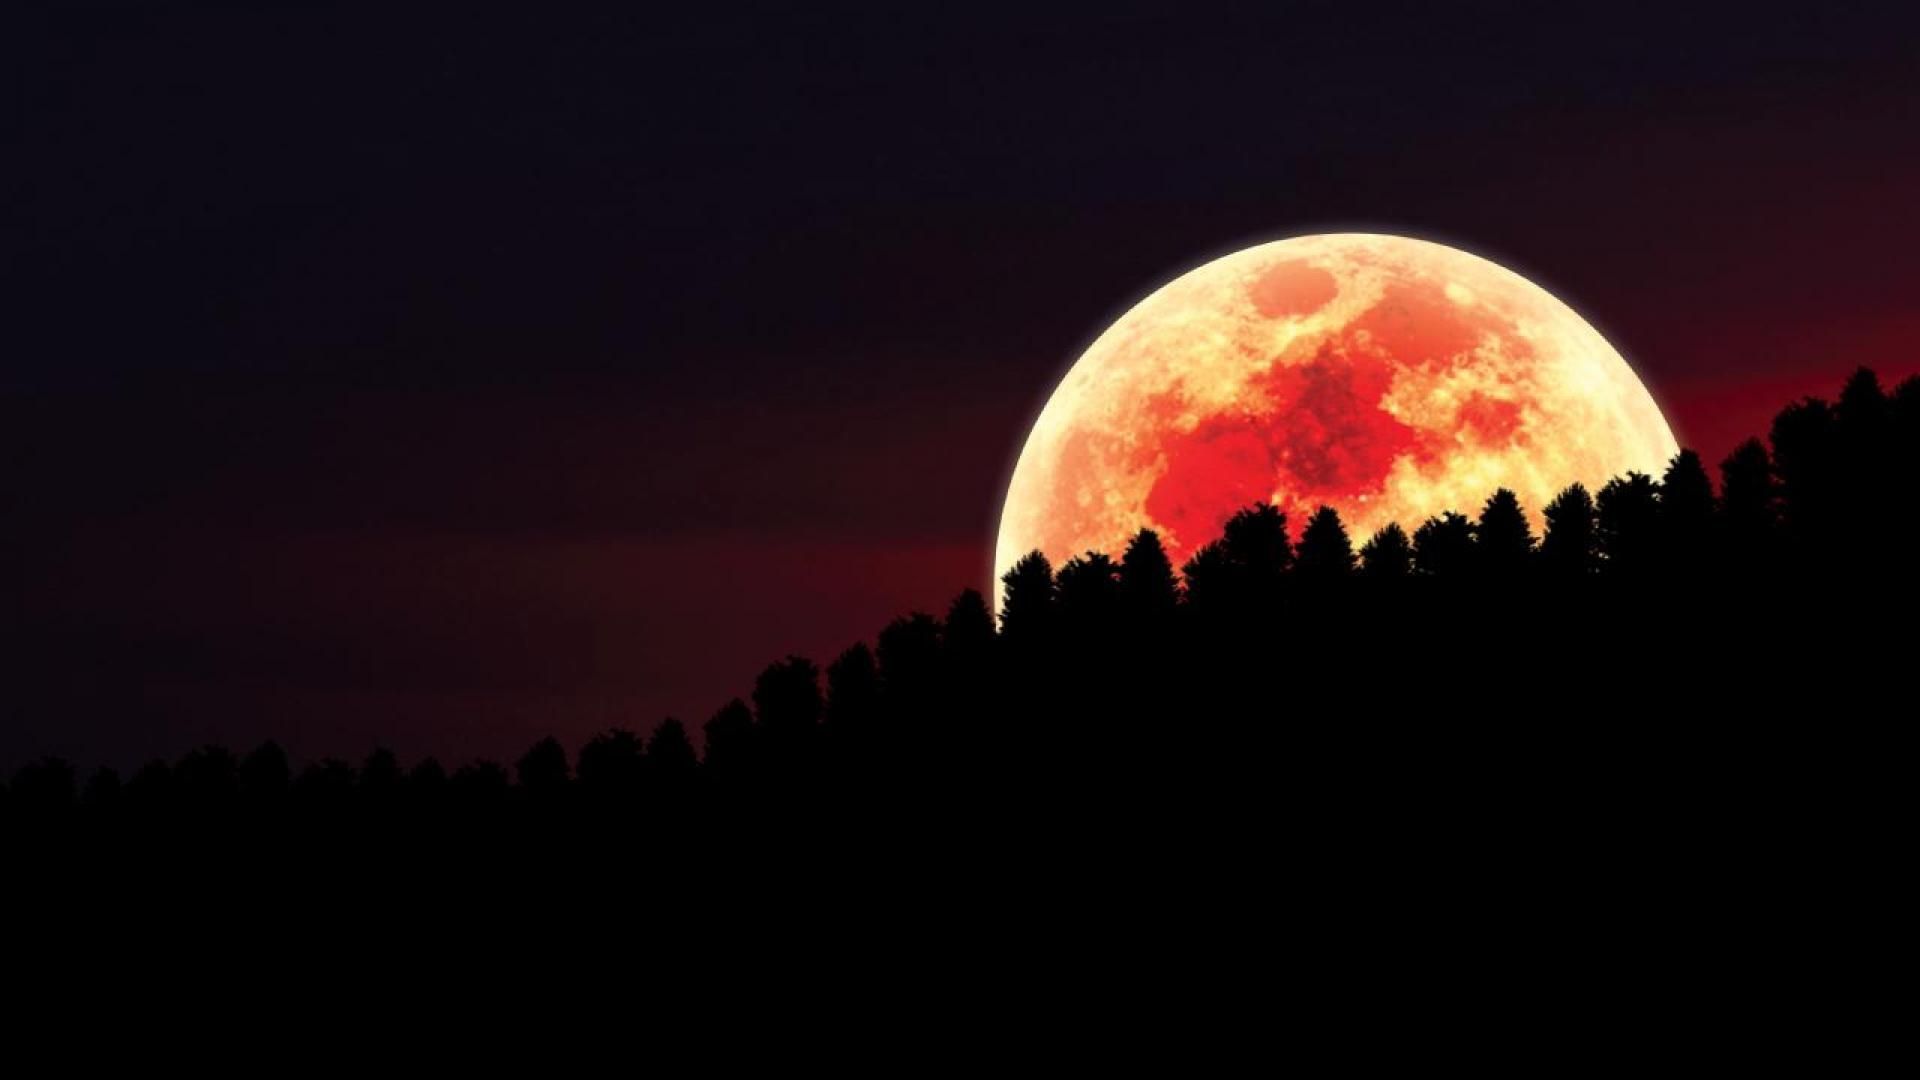 red moon over forest wallpaper - (#61368) - HQ Desktop Wallpapers ...